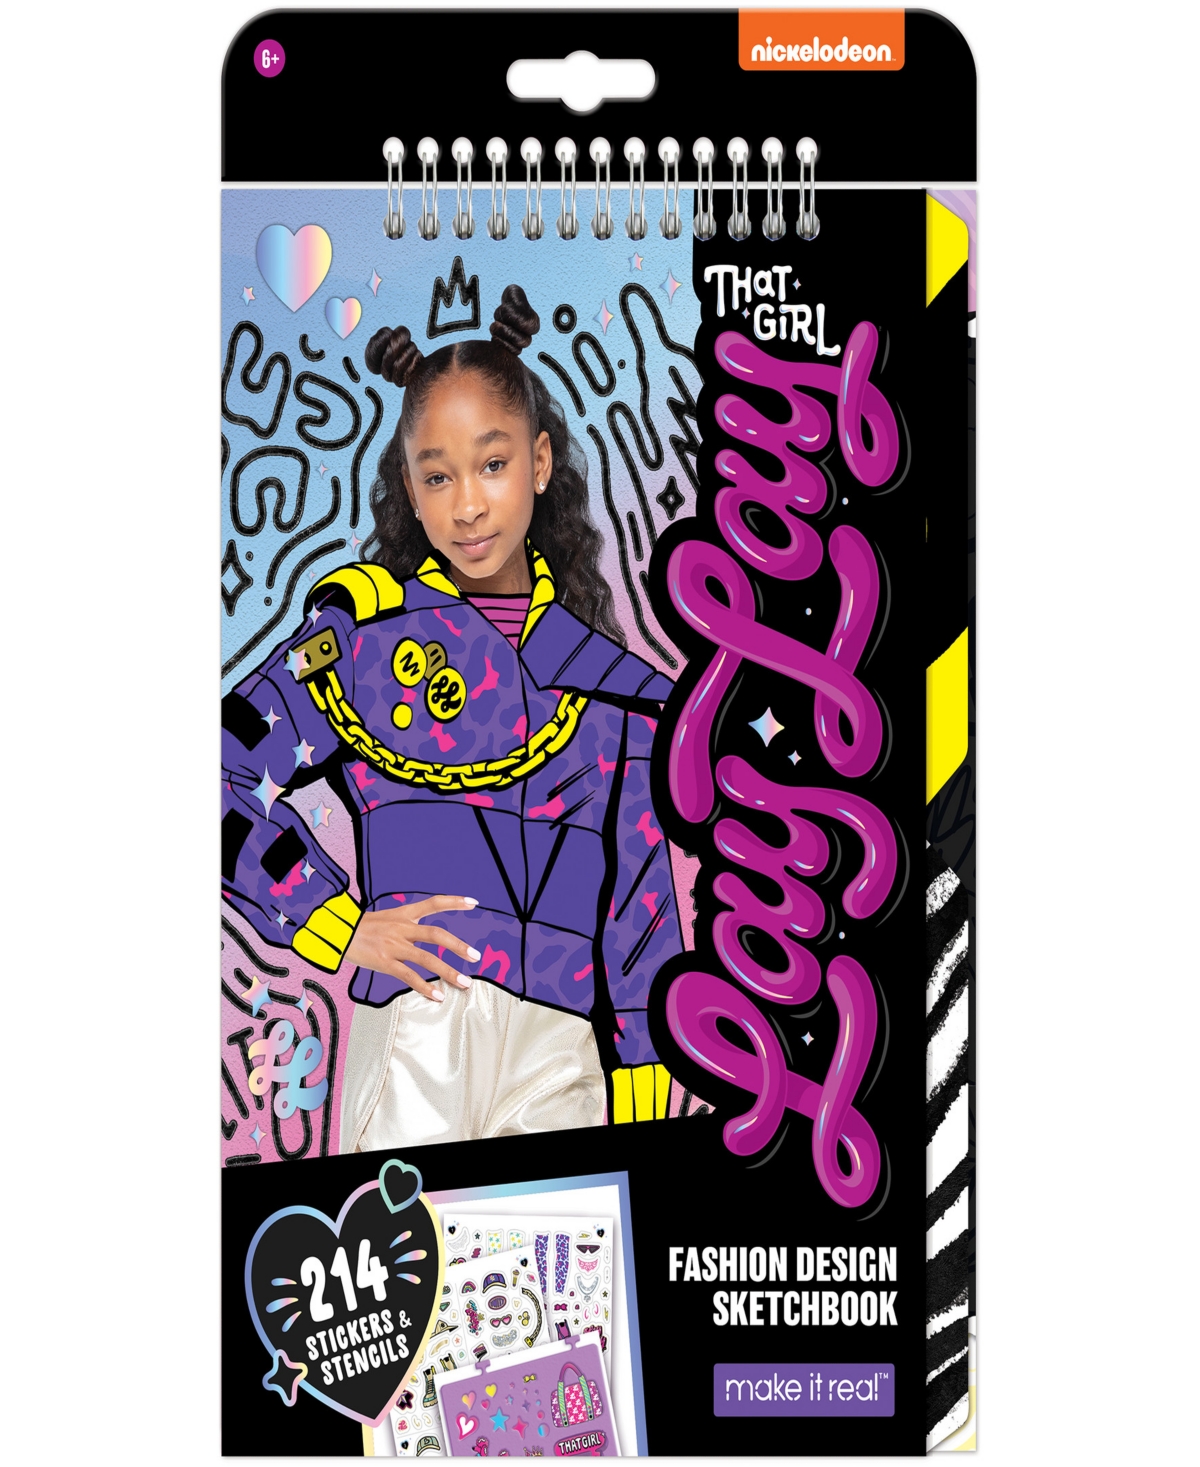 That Girl Lay Lay Kids' Fashion Design Sketchbook Make It Real, Nickelodeon, Includes 214 Stickers Stencils, Draw Sketch Cre In Multi